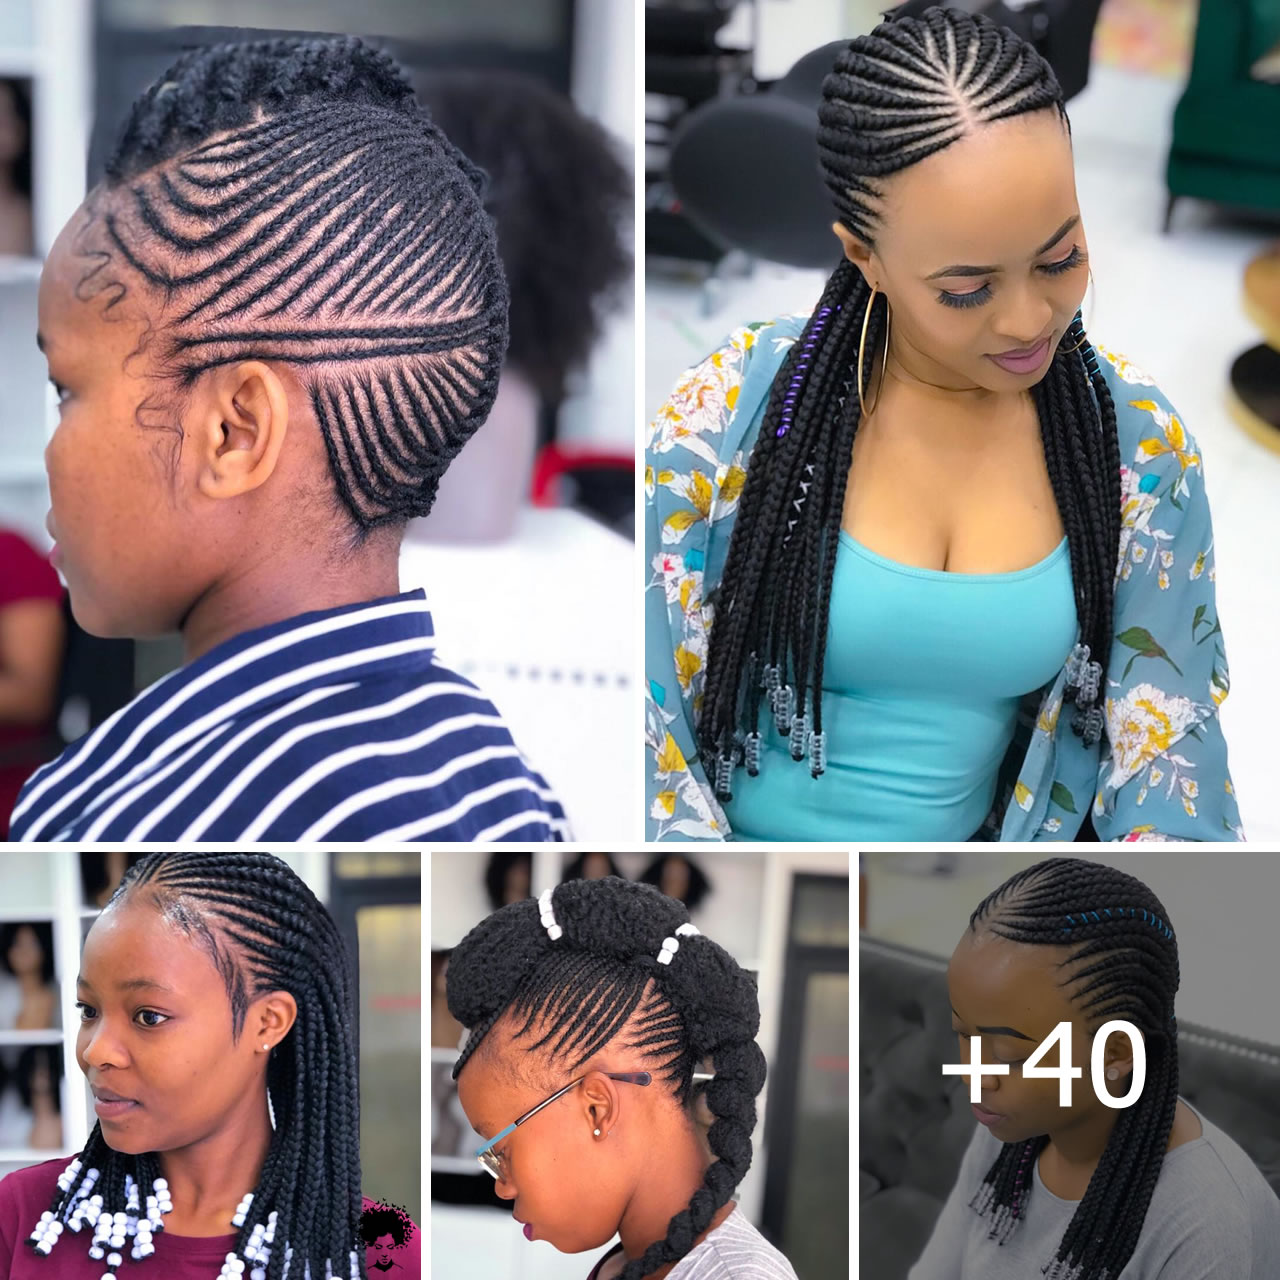 Stylish Recent Braided Hairstyles You Should Consider, Volume 5.